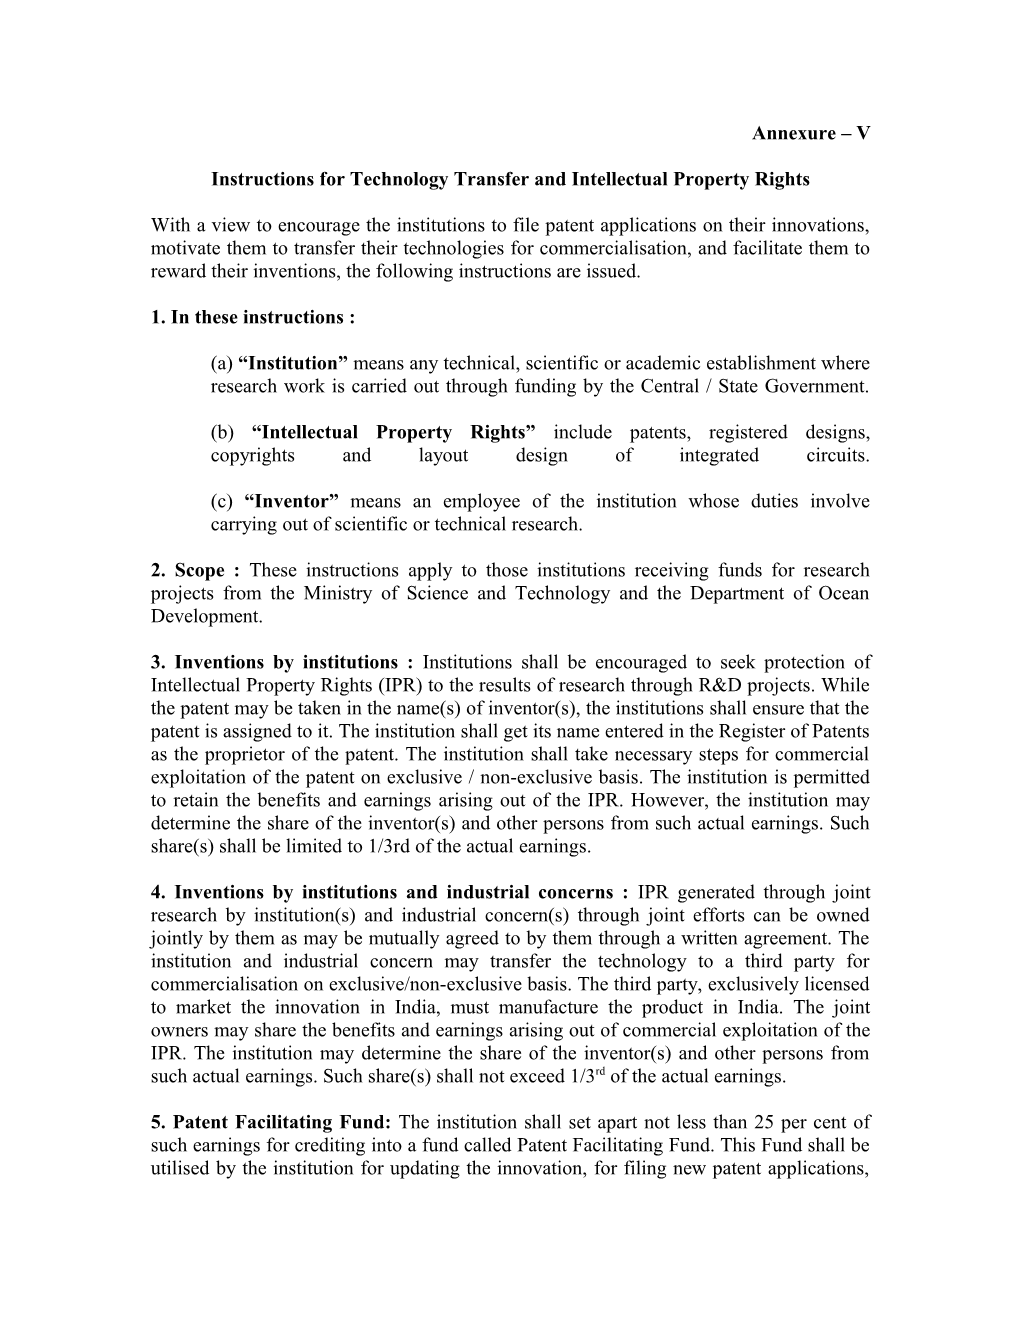 Instructions for Technology Transfer and Intellectual Property Rights